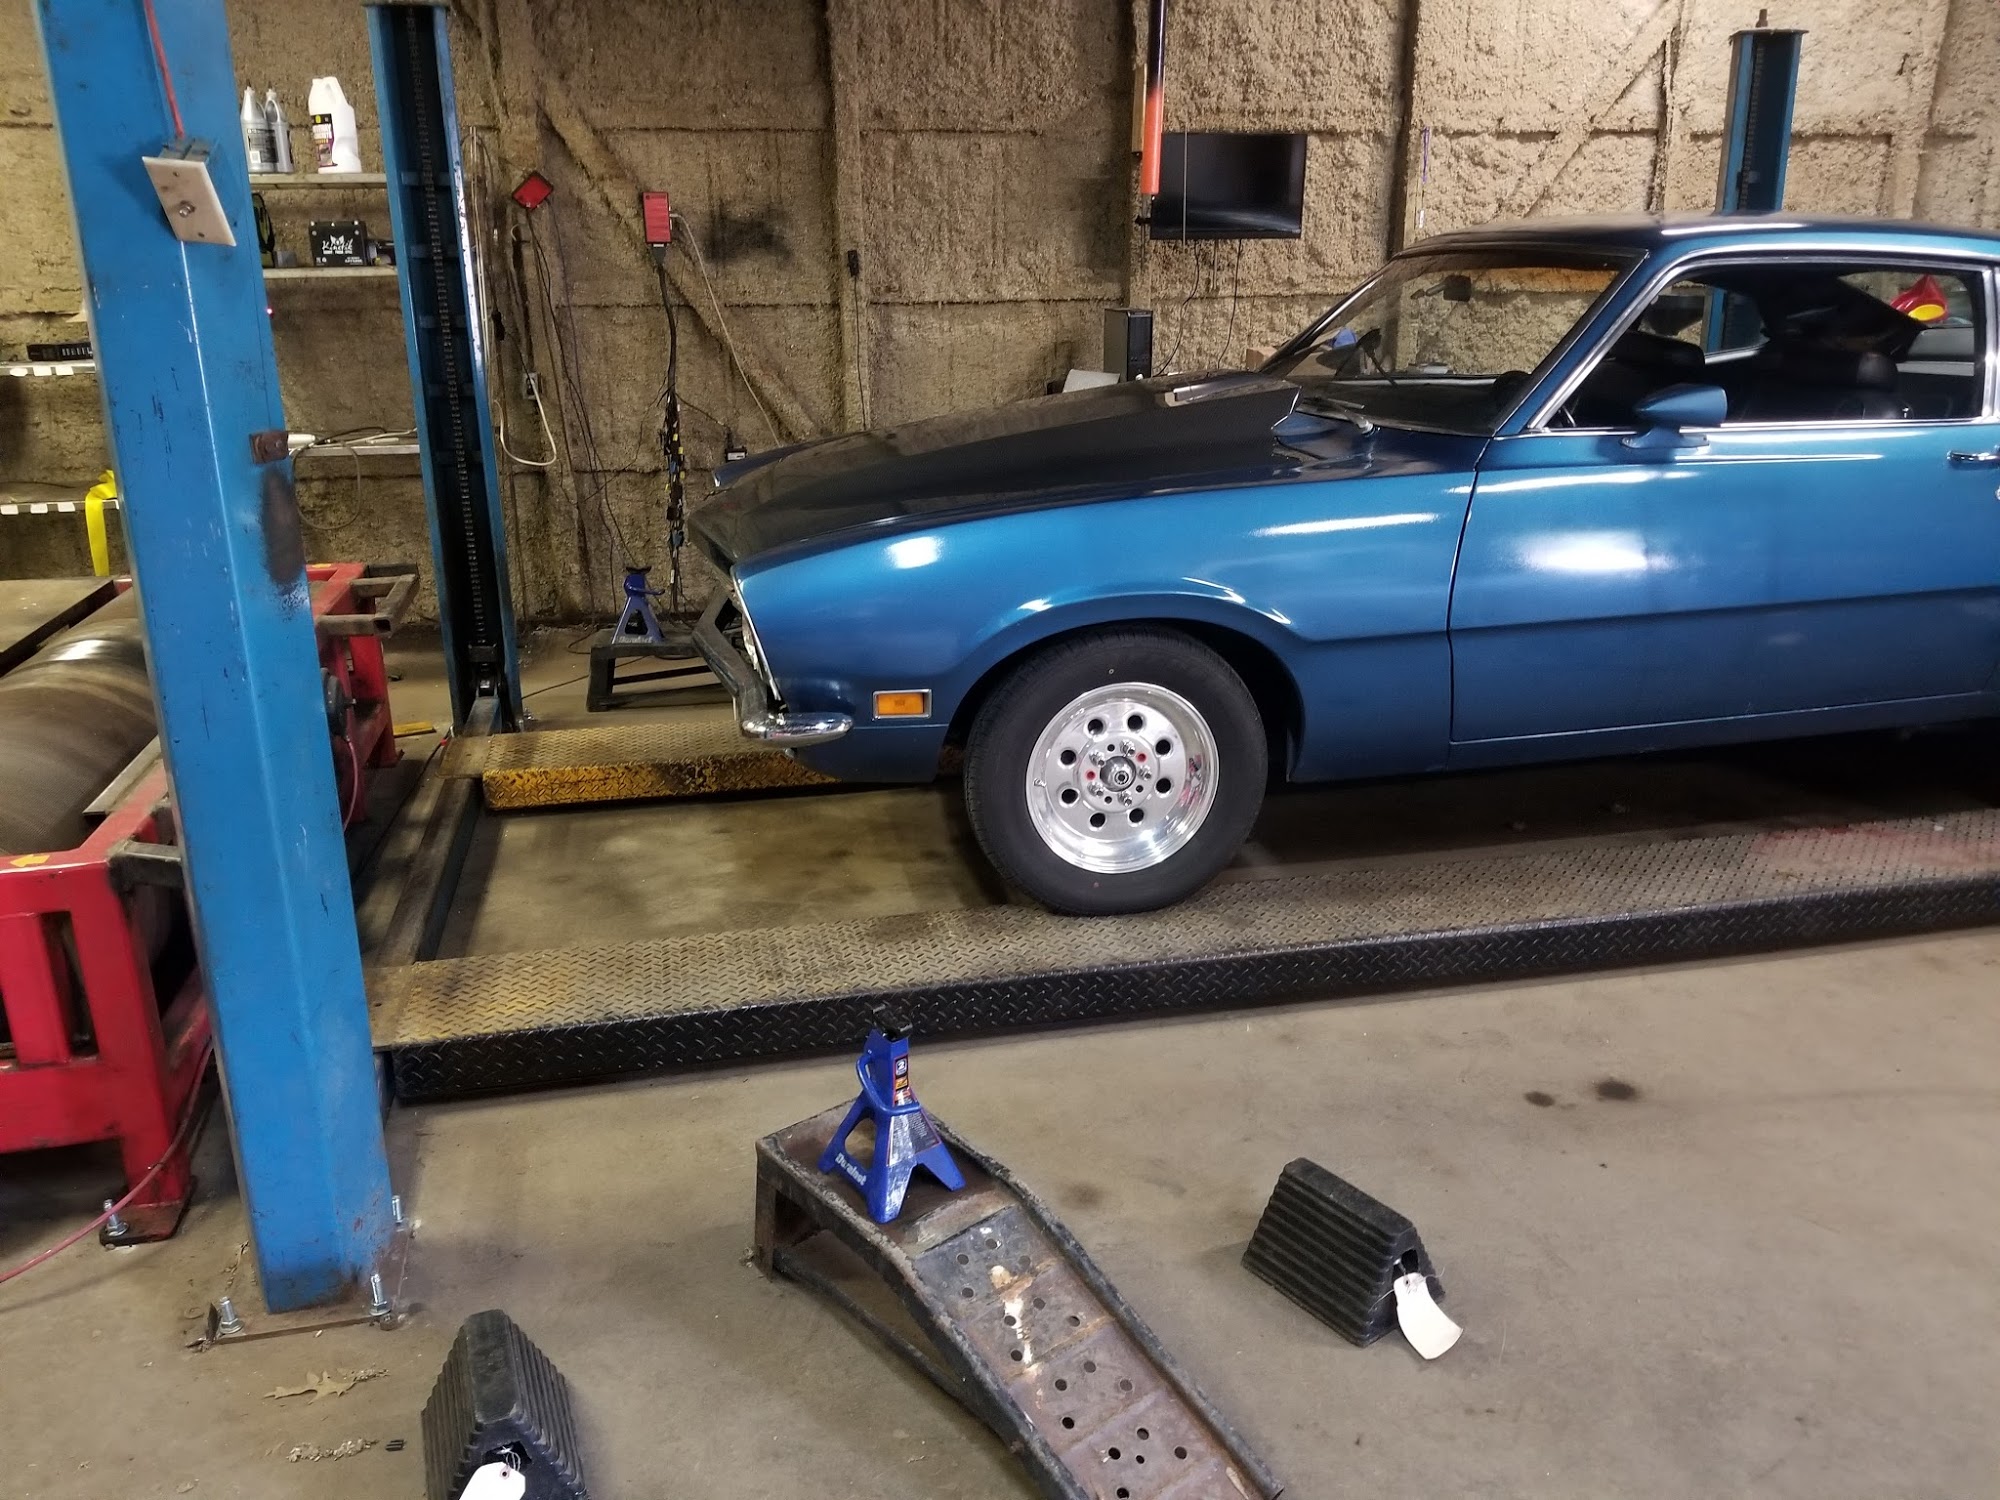 412 dyno shop and service